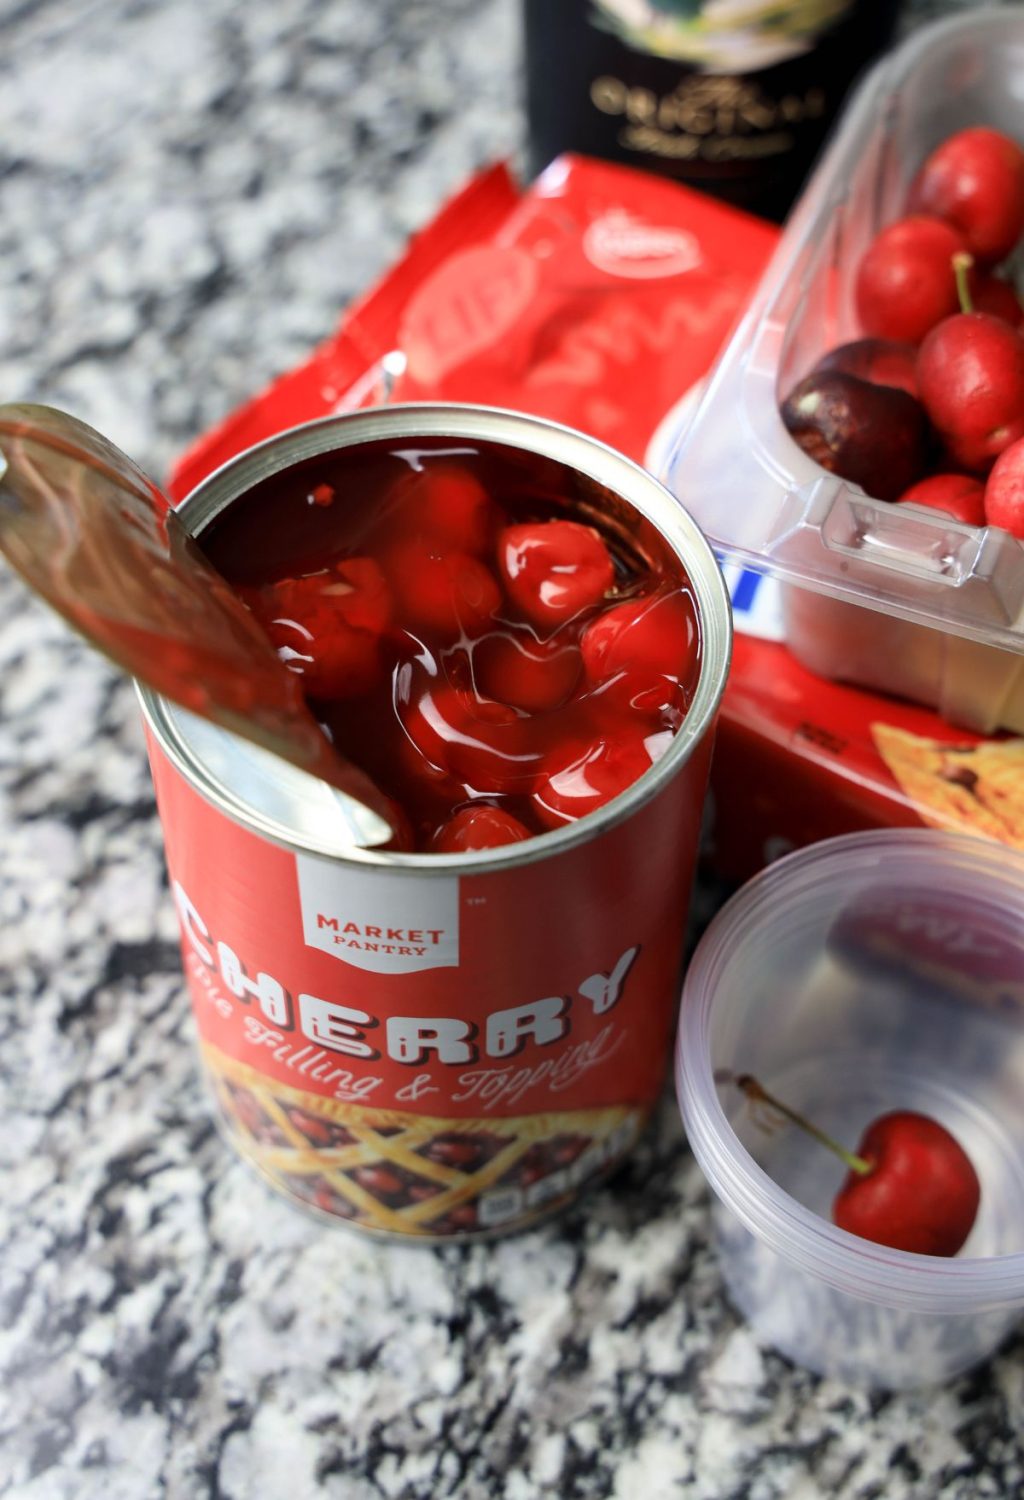 A can of cherry sauce on a counter next to a bottle of wine.